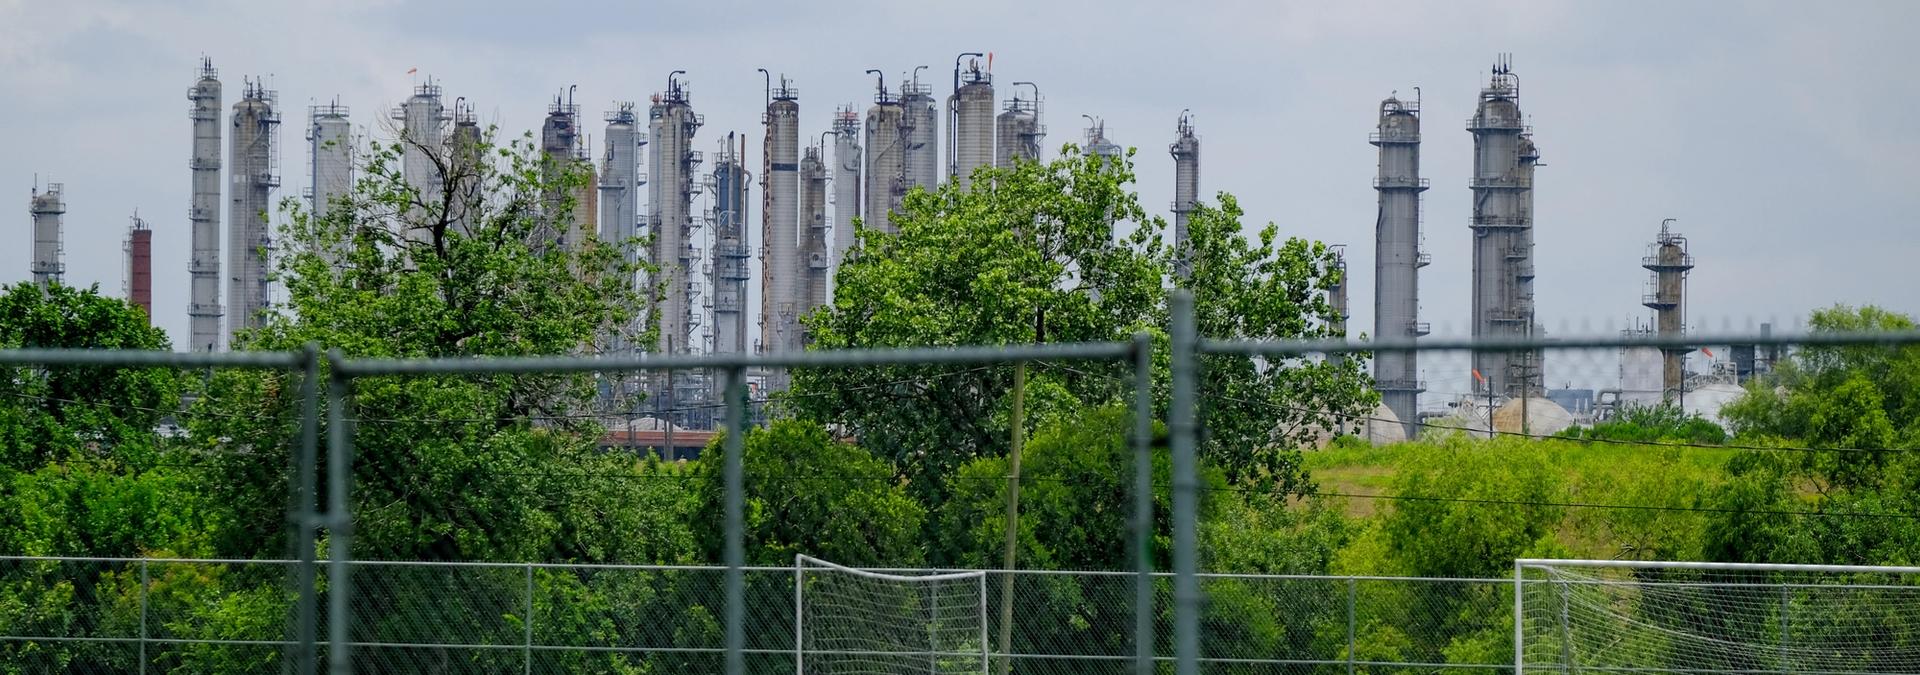 TPC Group's Houston plant was among the worst polluters of the cancer-causing 1,3-butadiene in Texas in 2019.